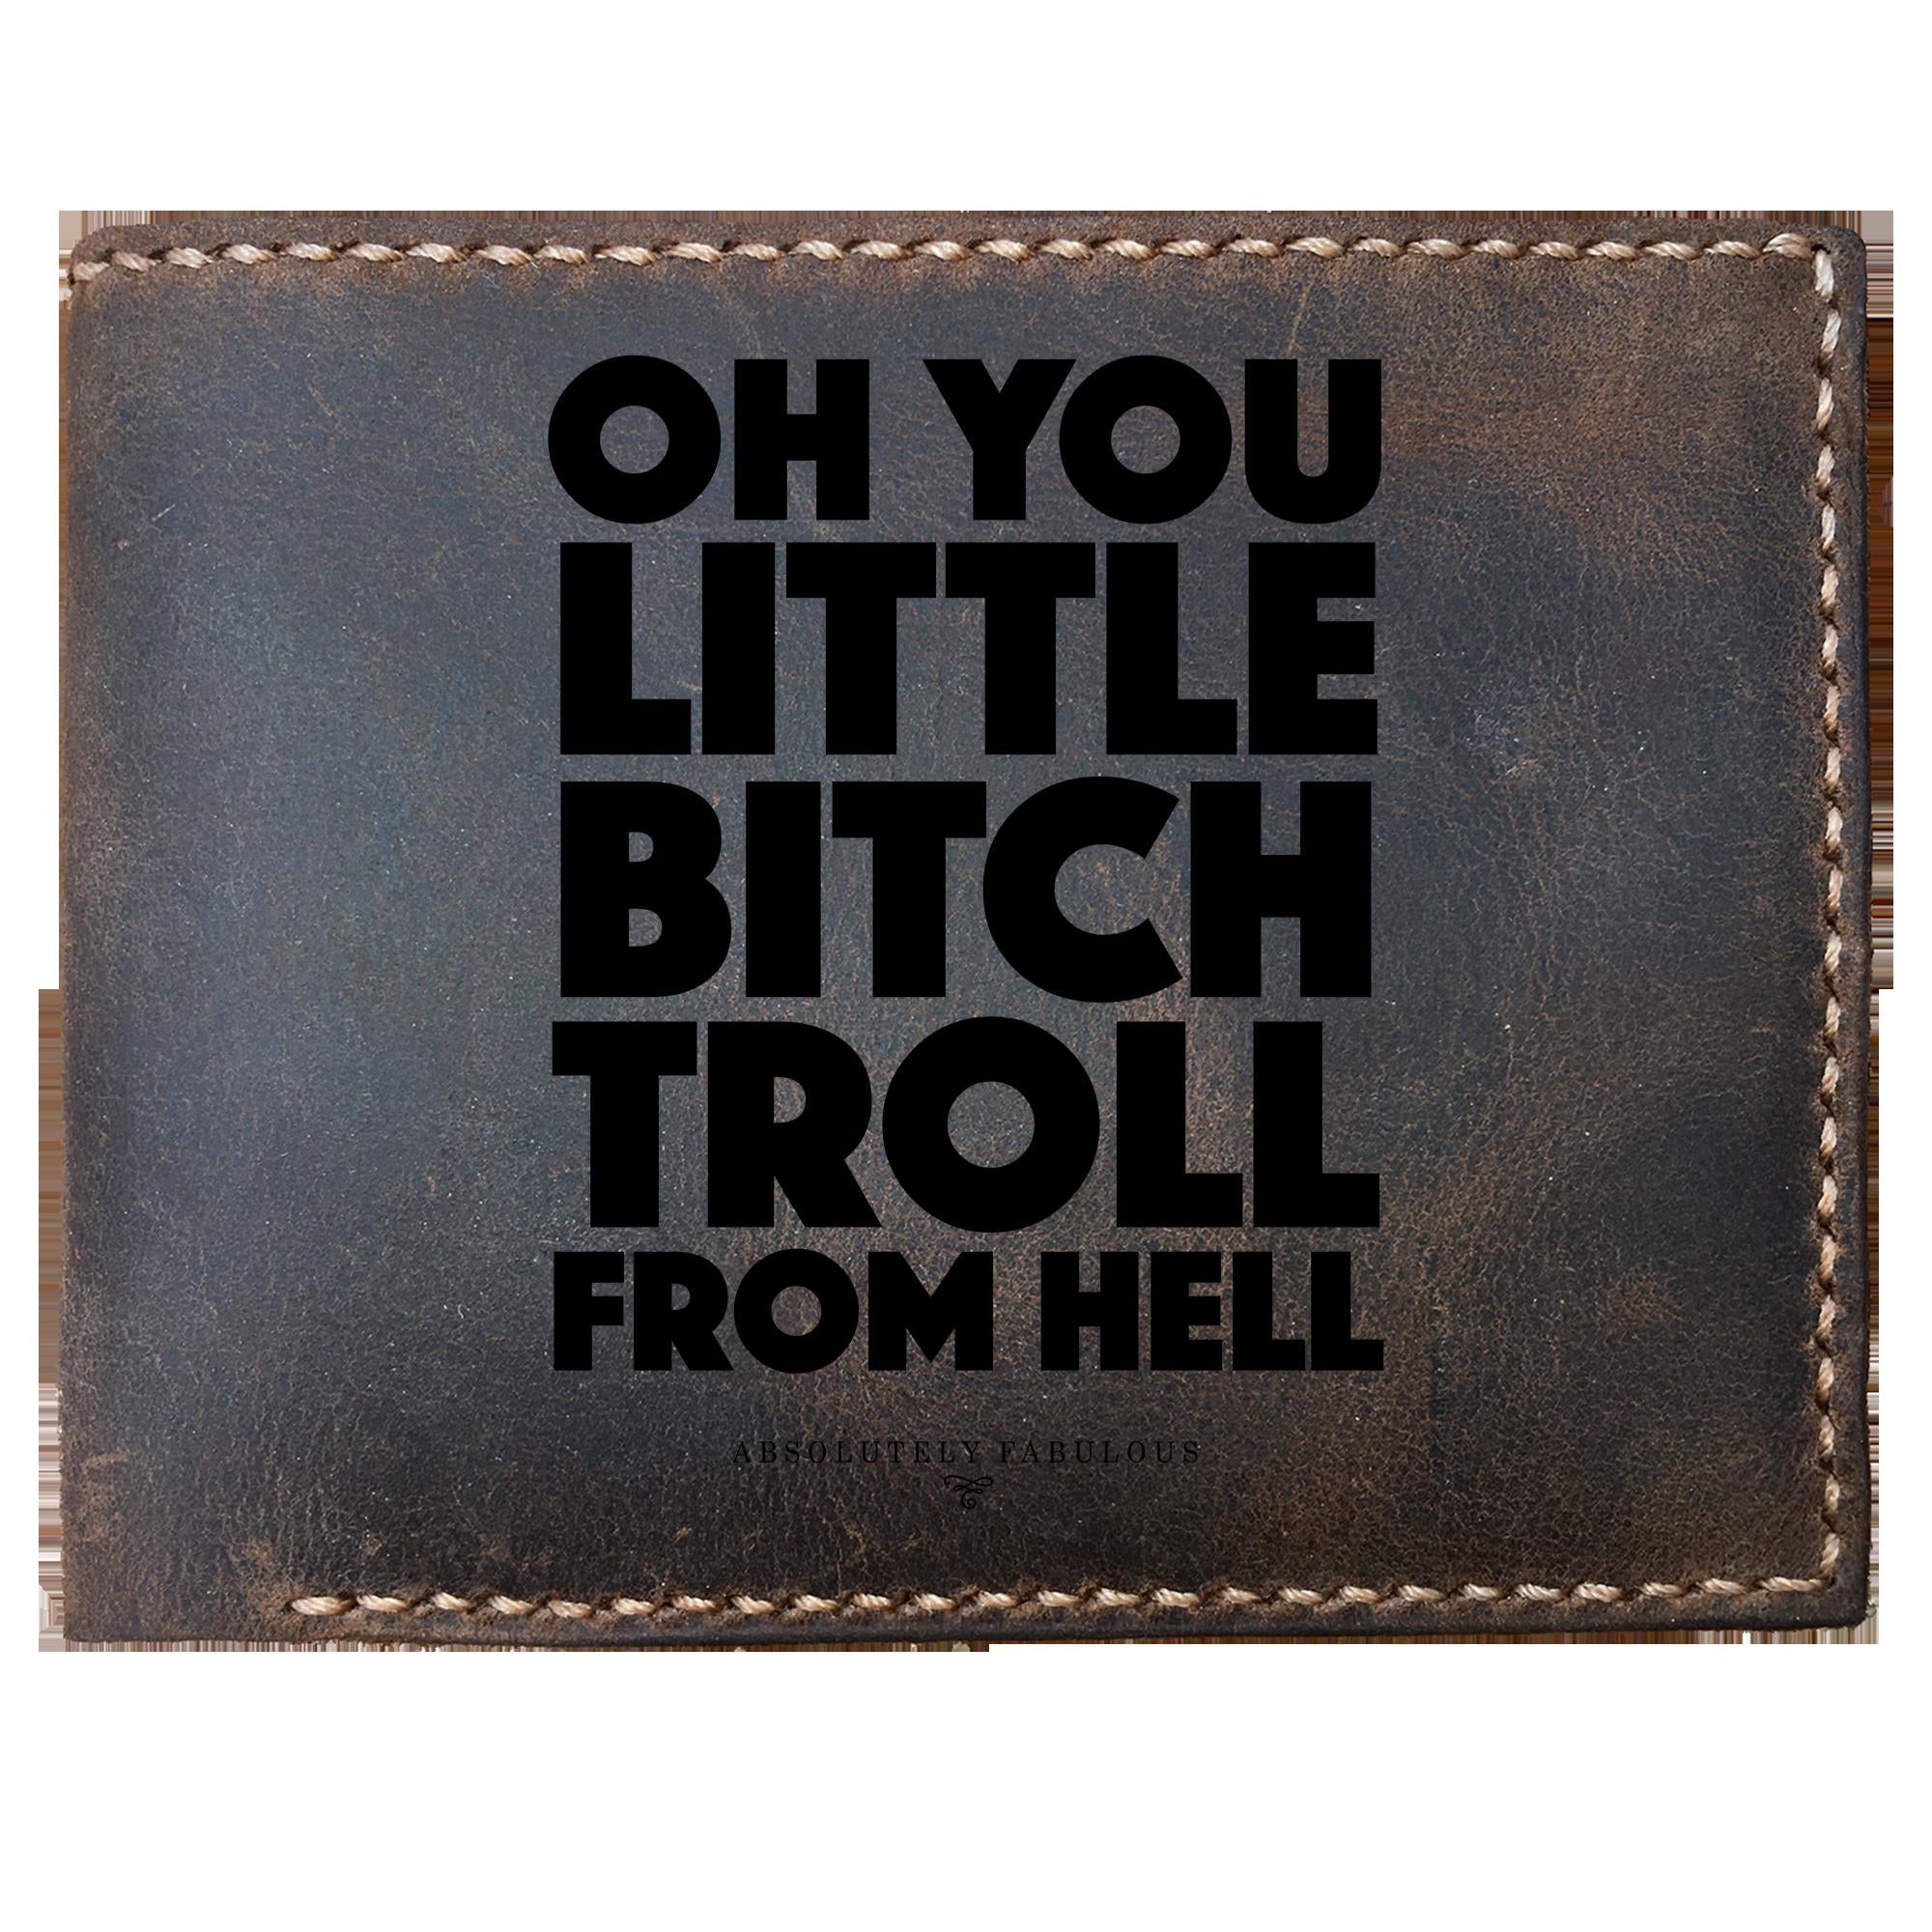 Skitongifts Funny Custom Laser Engraved Bifold Leather Wallet For Men, Oh You Little Bitch Troll From Hell